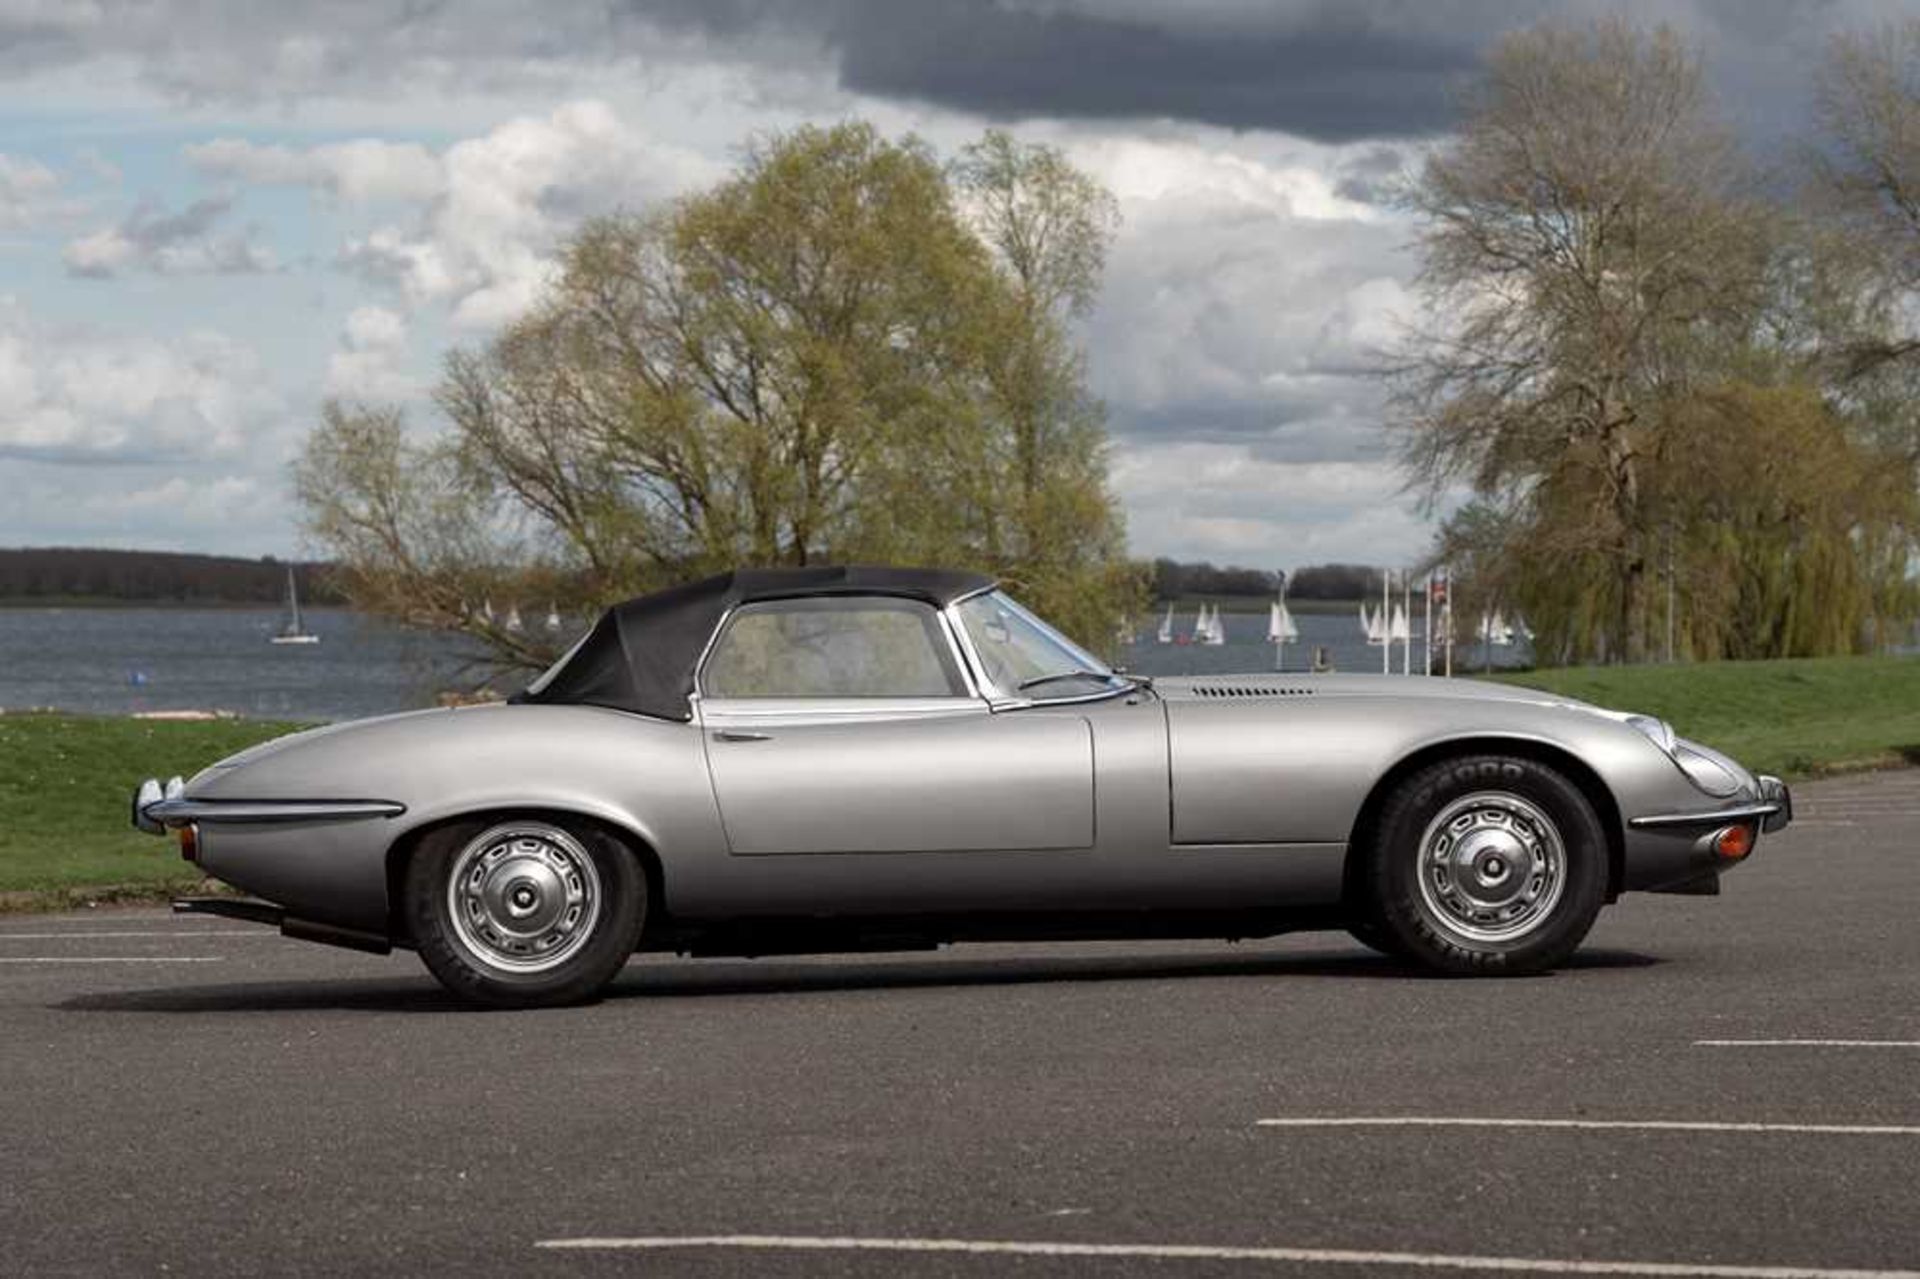 1974 Jaguar E-Type Series III V12 Roadster Only one family owner and 54,412 miles from new - Image 34 of 89